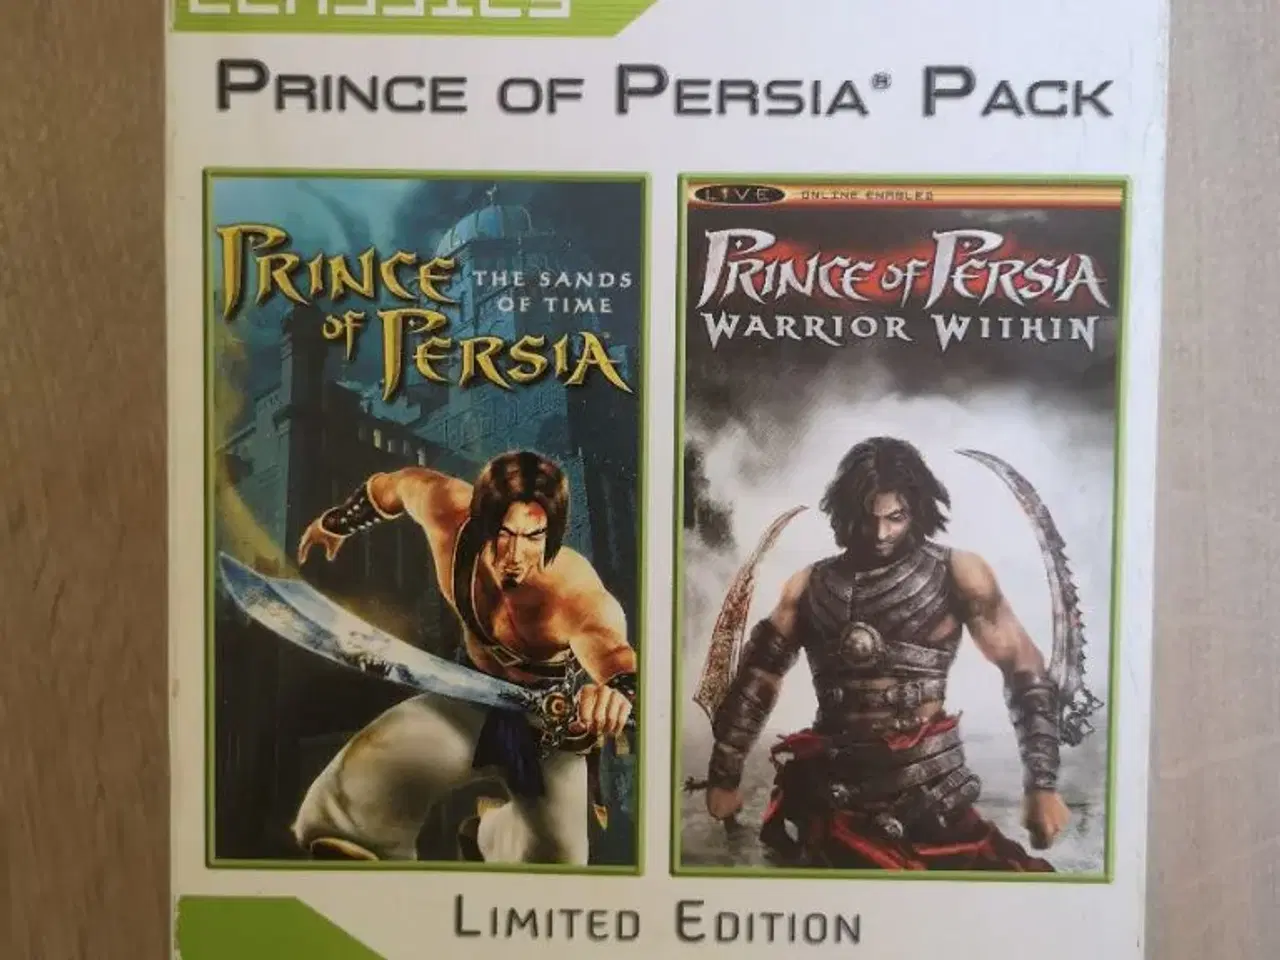 Billede 1 - Prince of persia collection